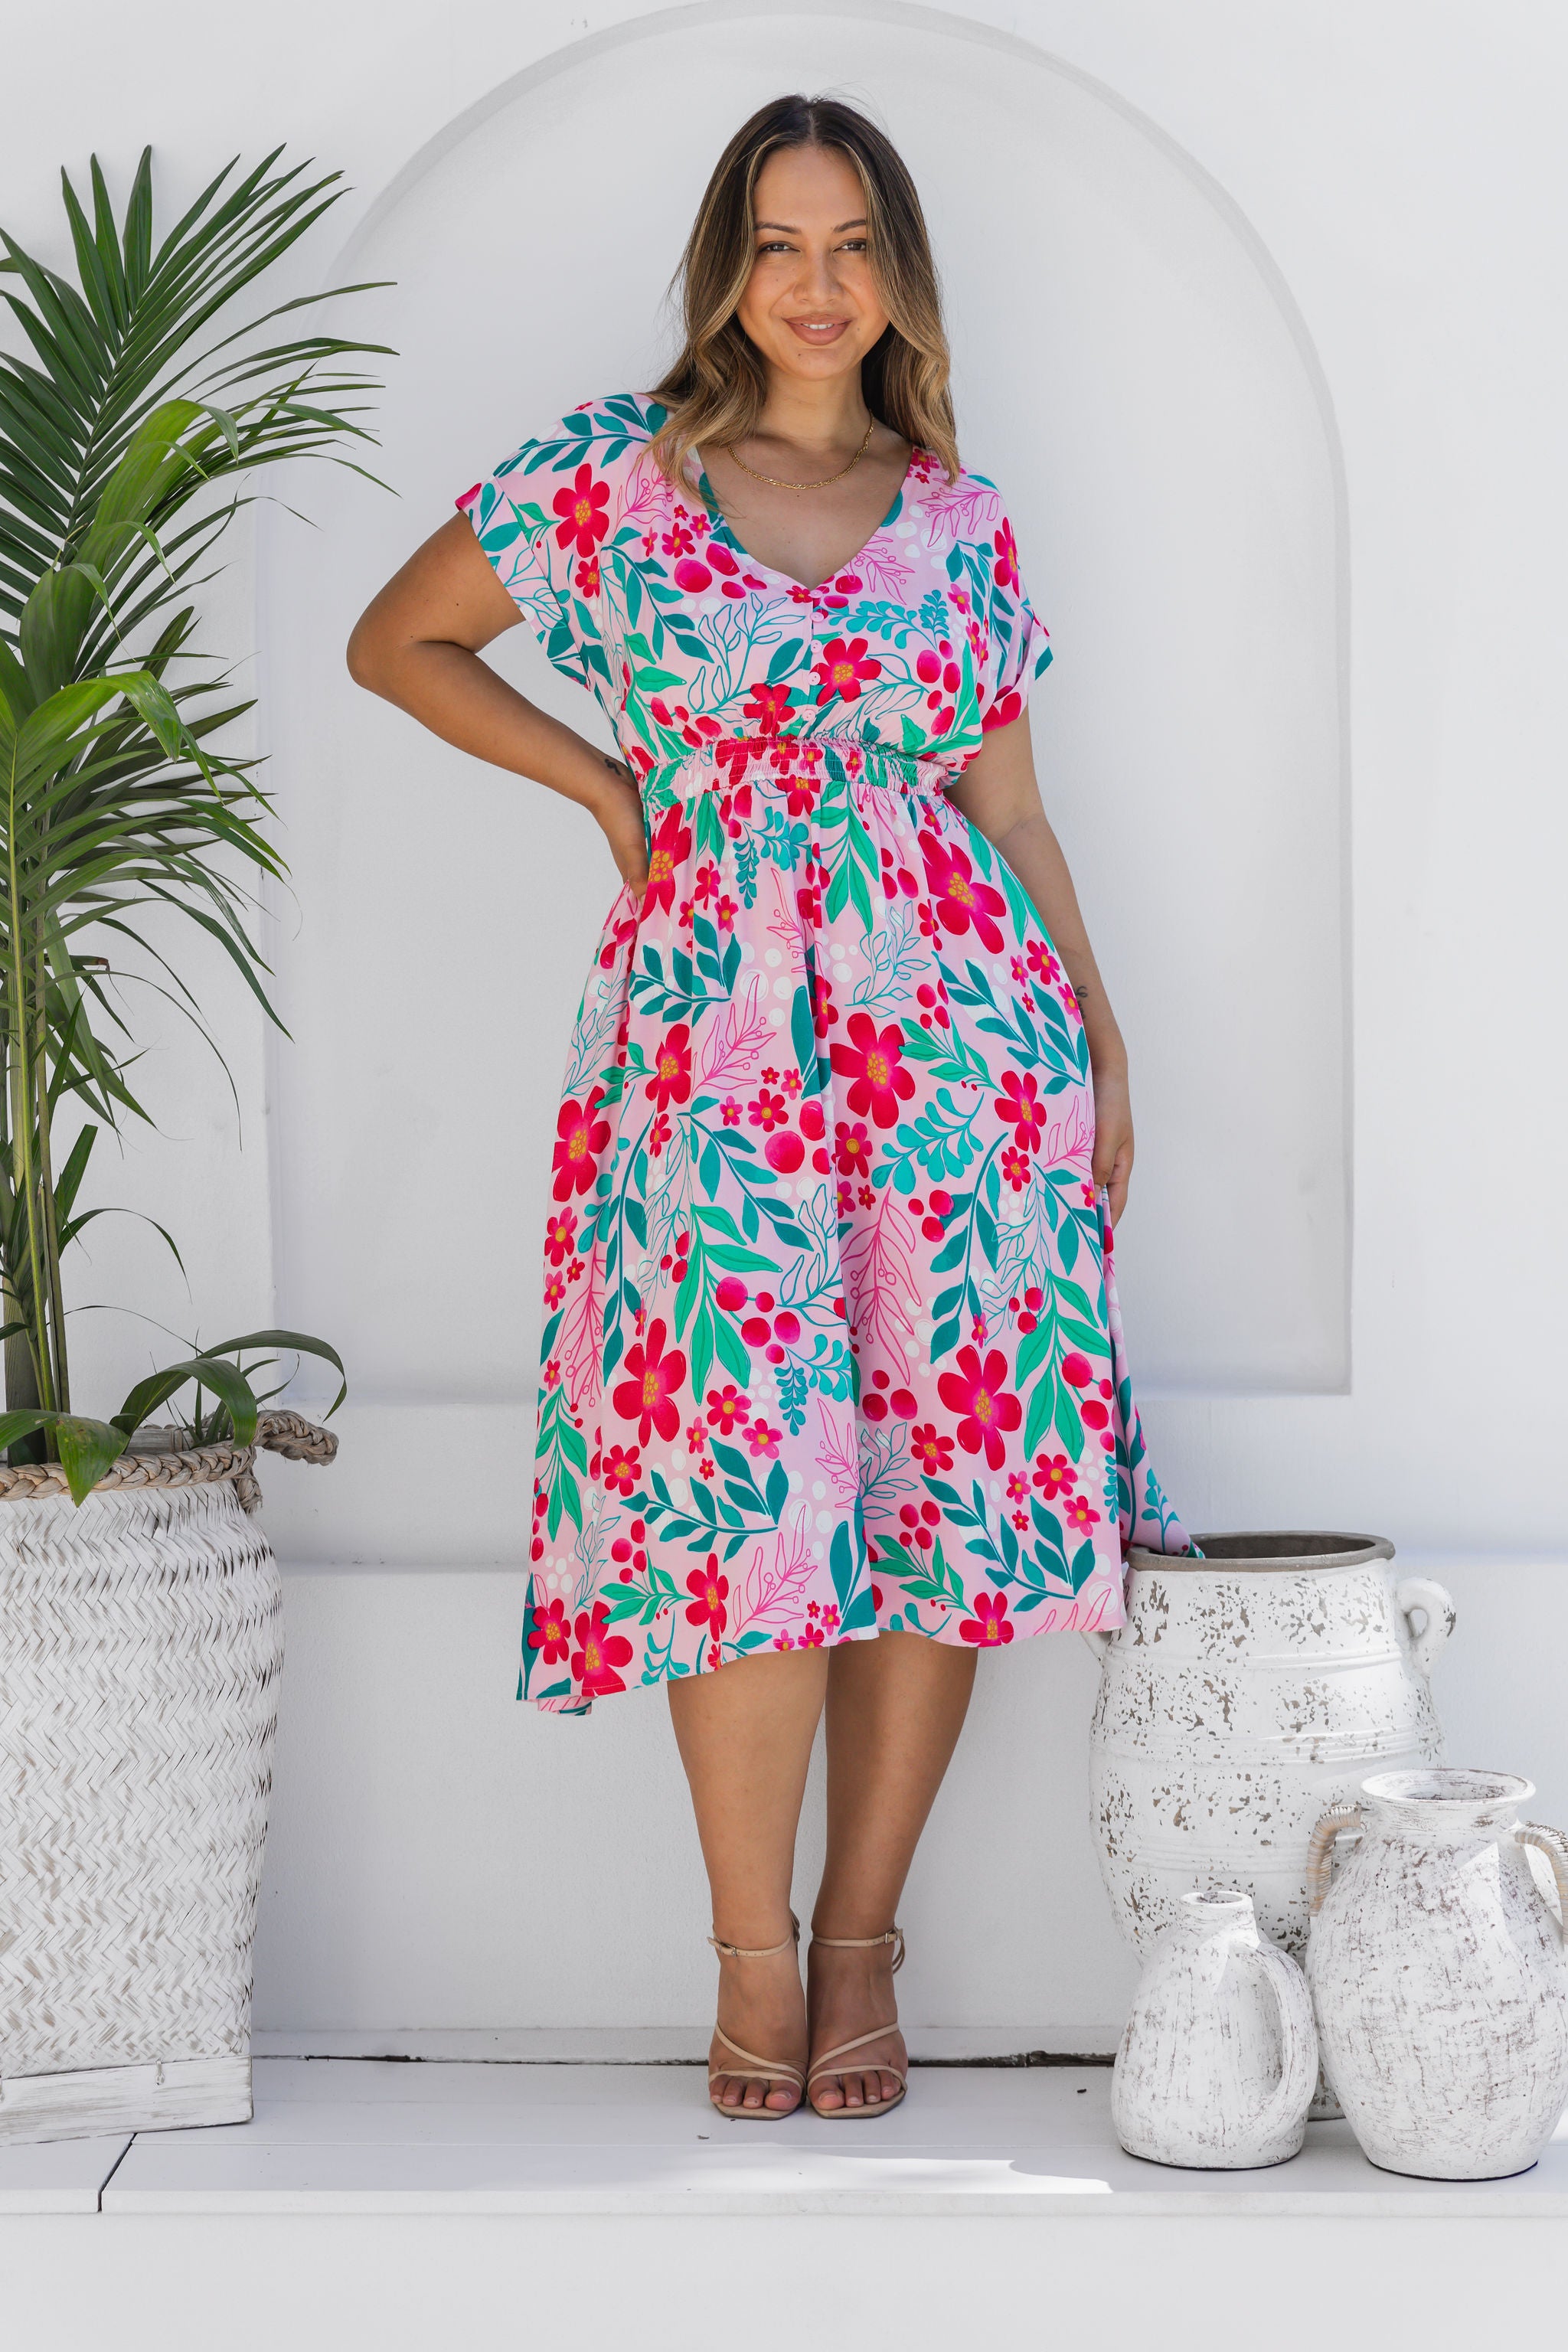 Millie Dress in Festive Floral by Kasey Rainbow